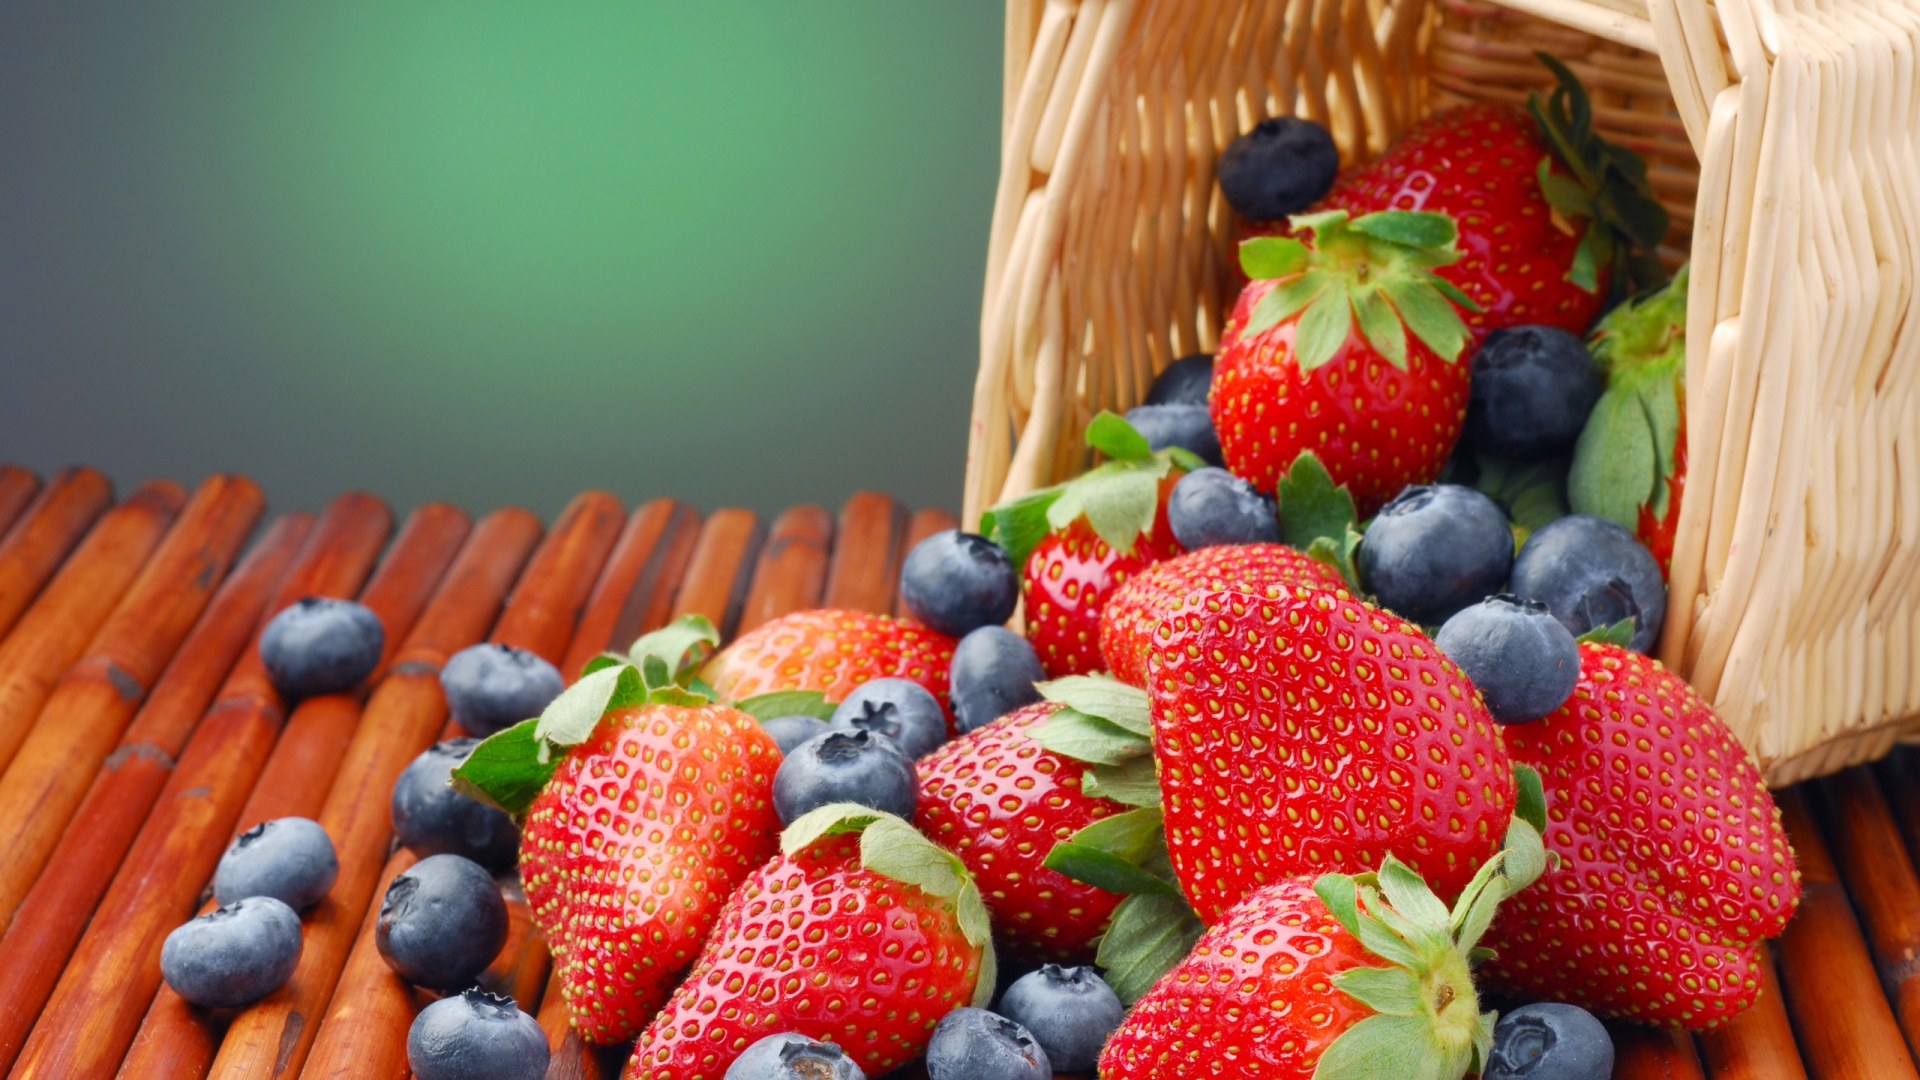 Blueberry and Strawberry for 1920 x 1080 HDTV 1080p resolution